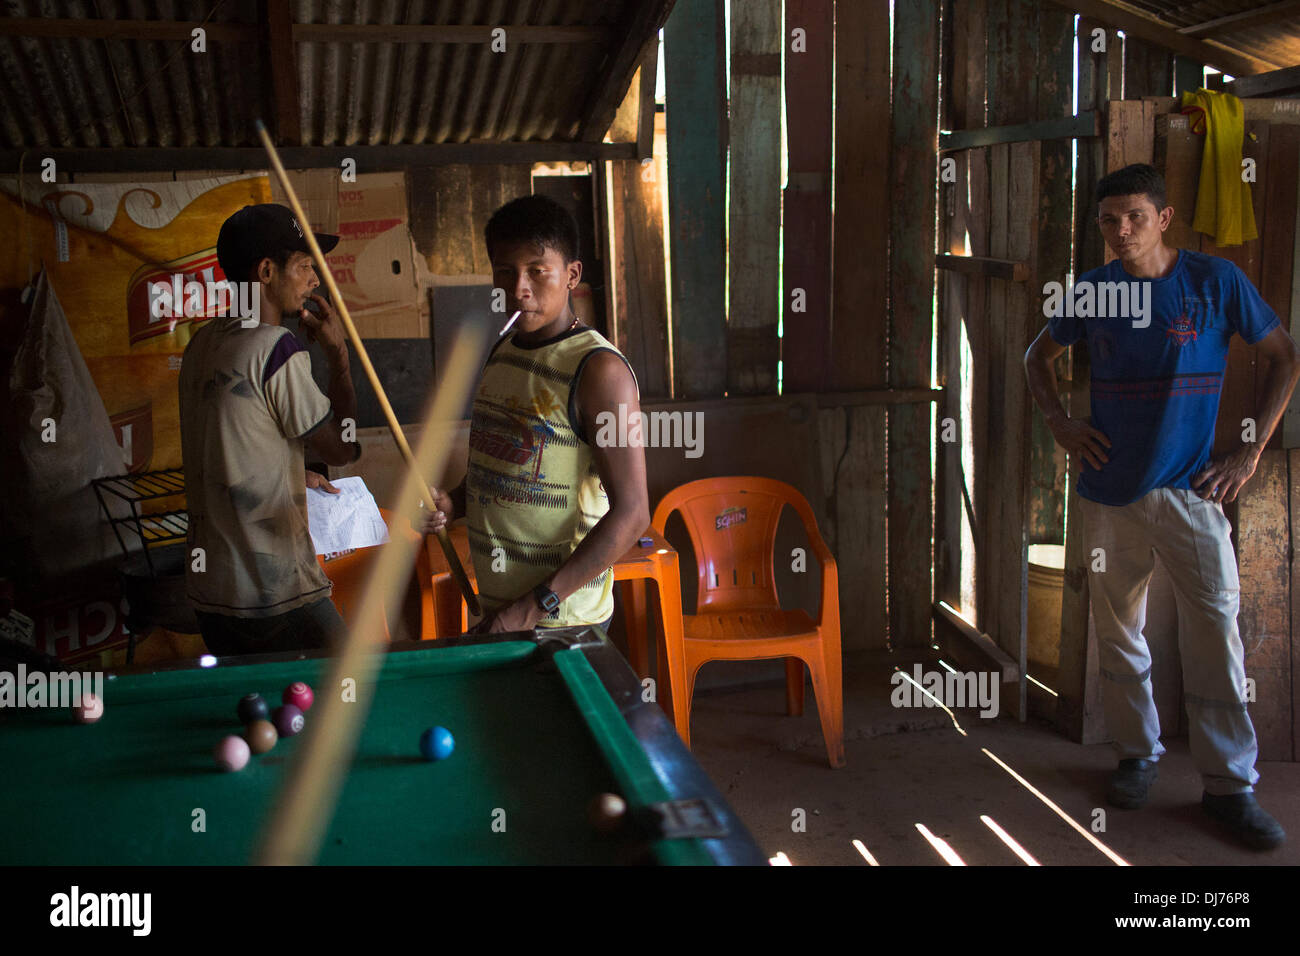 May 16, 2013 - Poti-Kro, Para, Brazil - Bekre, a young Xikrin man, plays pool with friends in an Altamira bar. Xikrin people live on the Bacaja, a tributary of the Xingu River, where construction of the Belo Monte Dam is reaching peak construction. Some scientists warn that the water level of the Bacaja will decrease precipitously due to the dam. (Credit Image: © Taylor Weidman/ZUMA Wire/ZUMAPRESS.com) Stock Photo